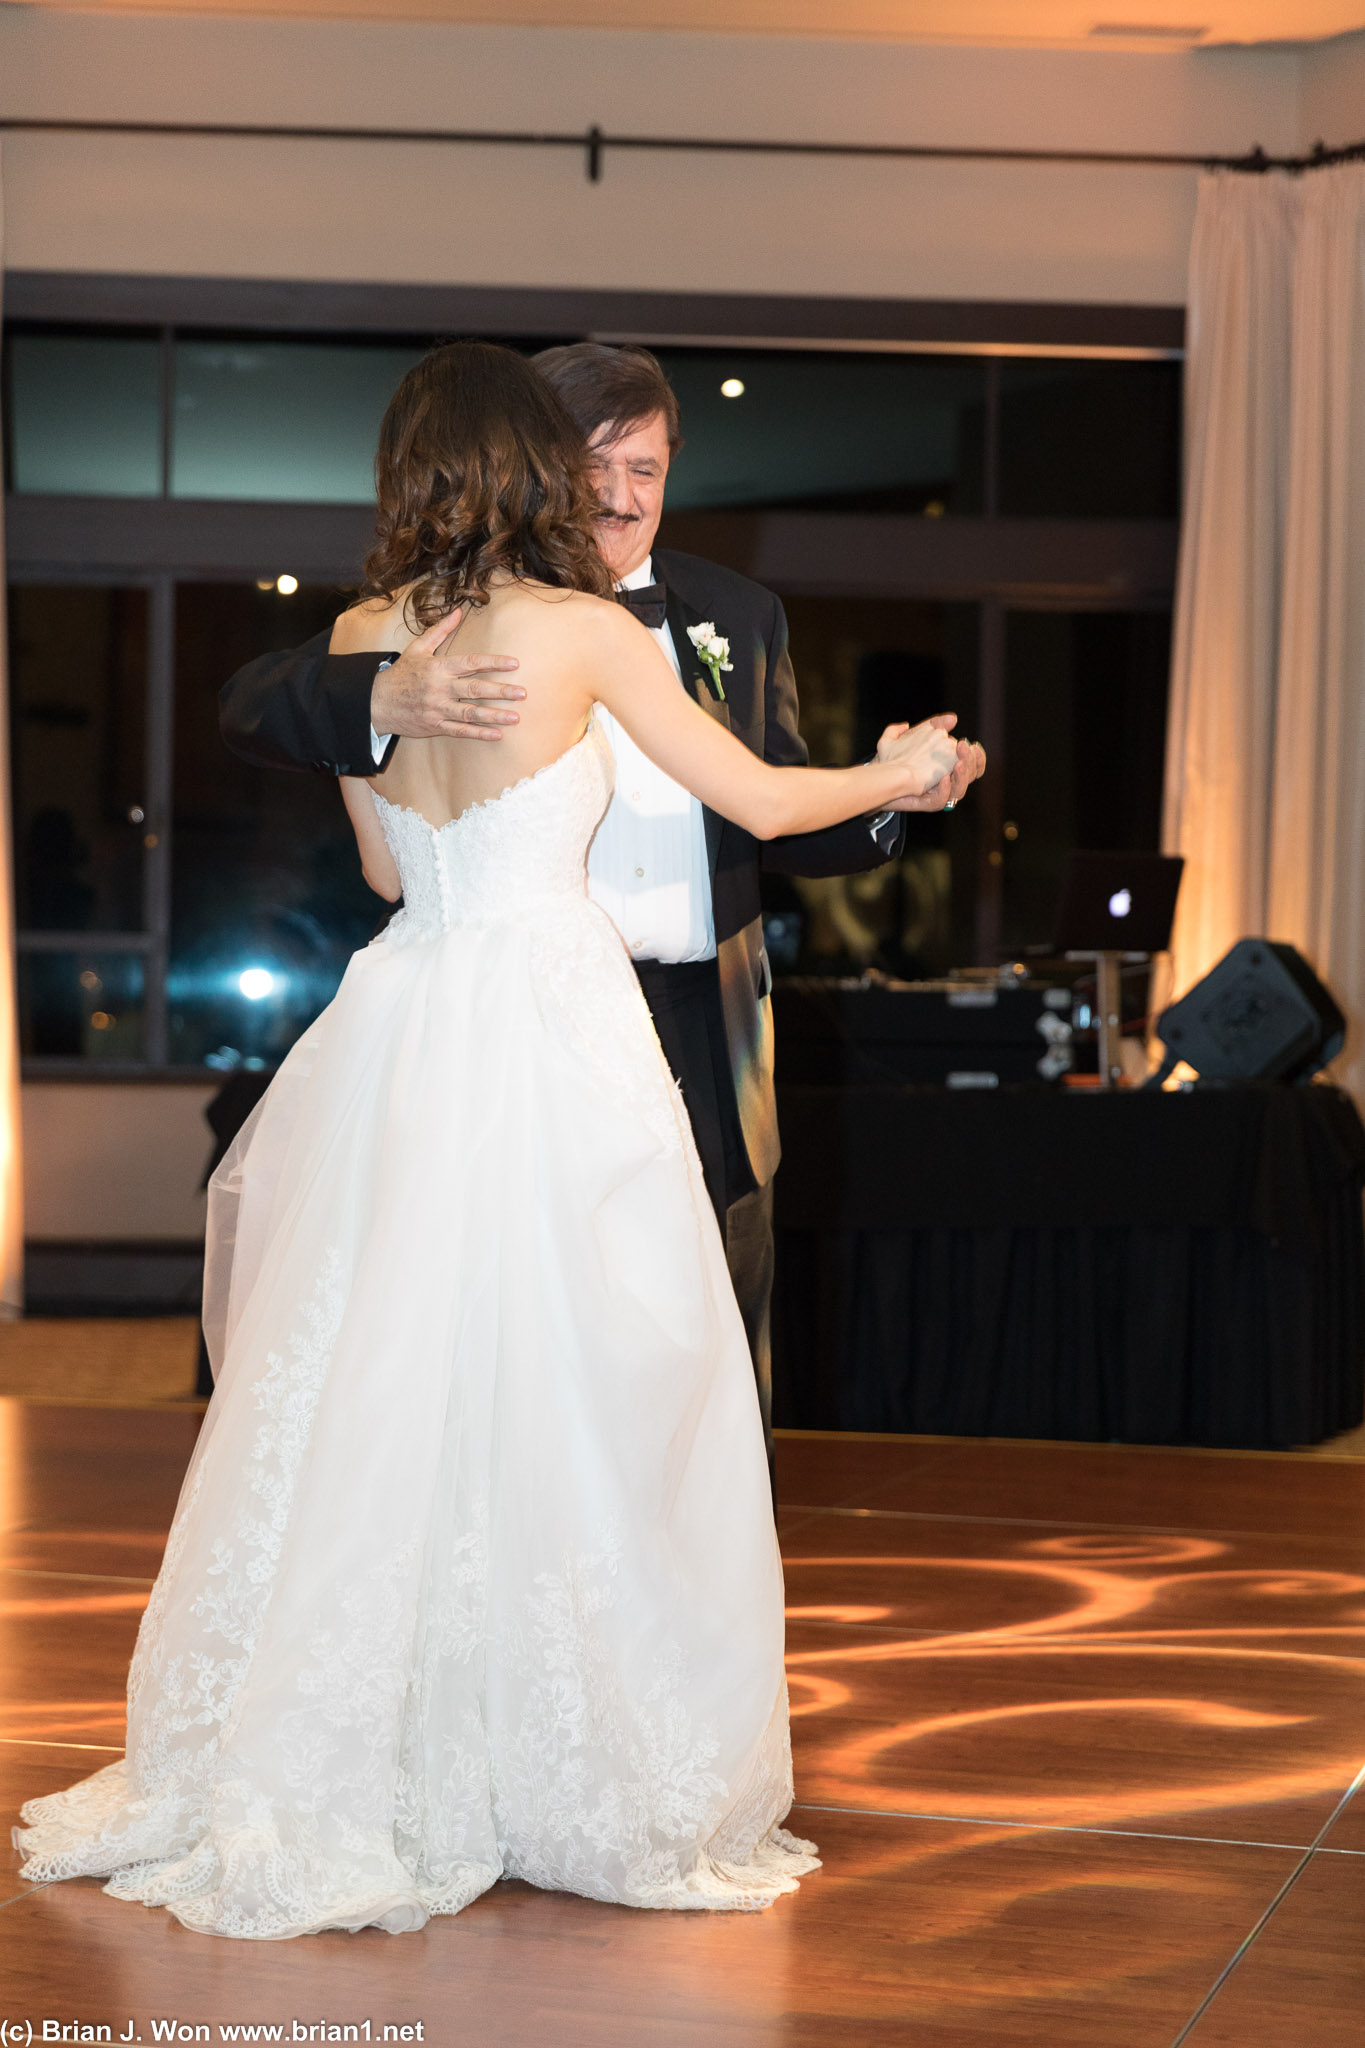 Father-daughter dance.